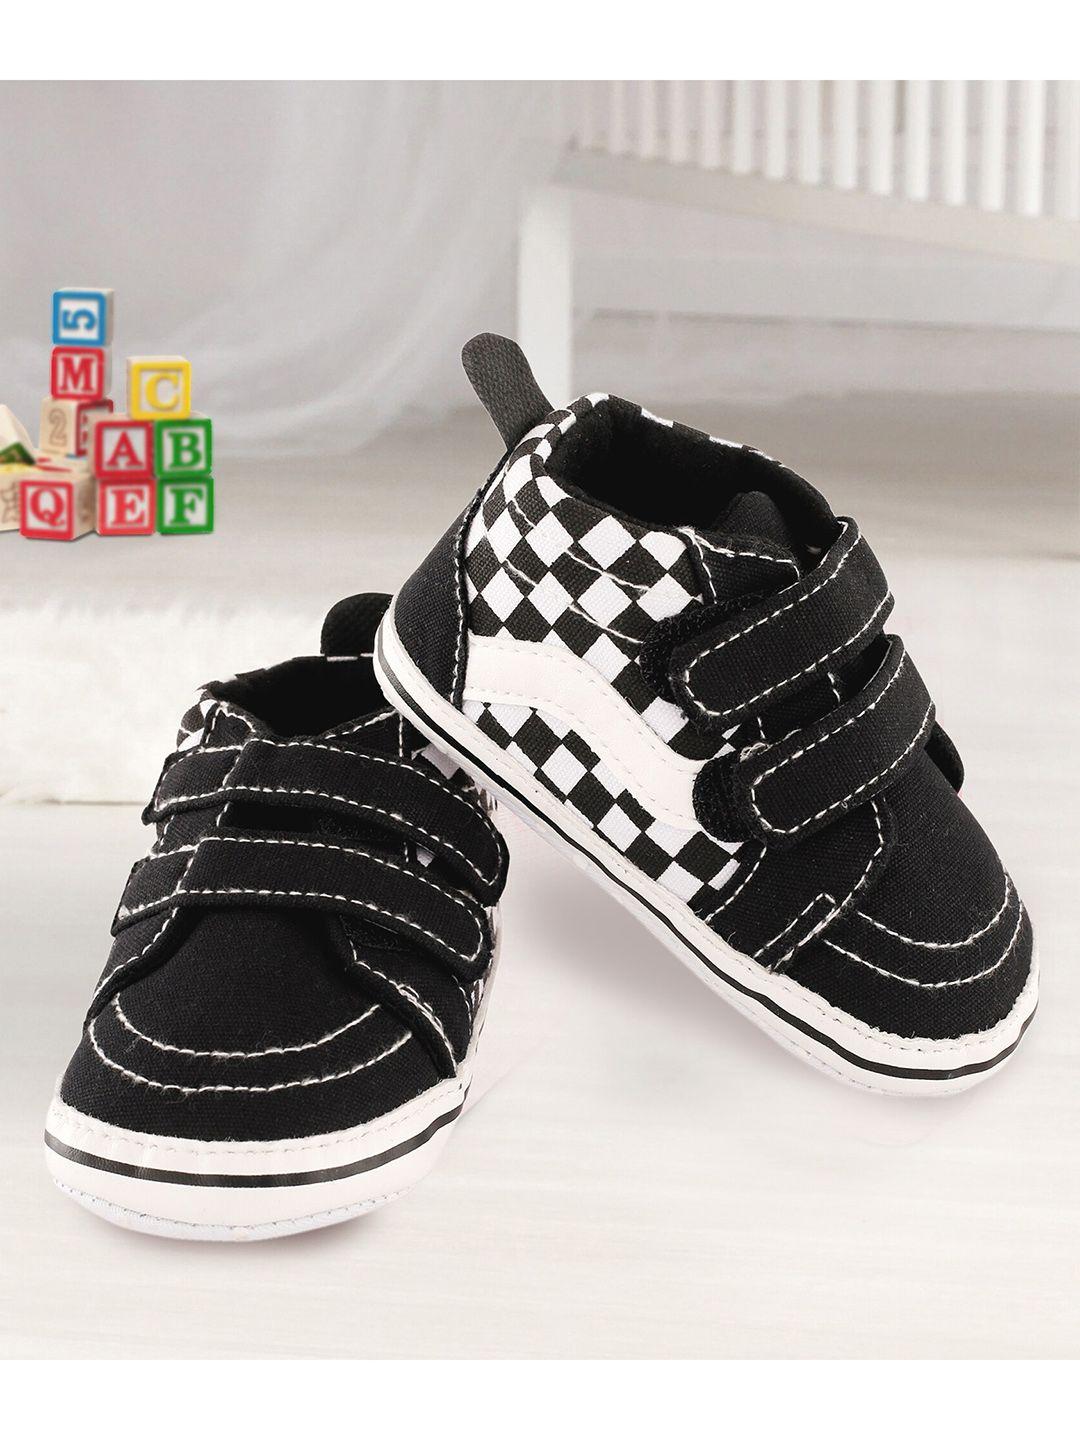 baby moo infant black & white checkered casual booties